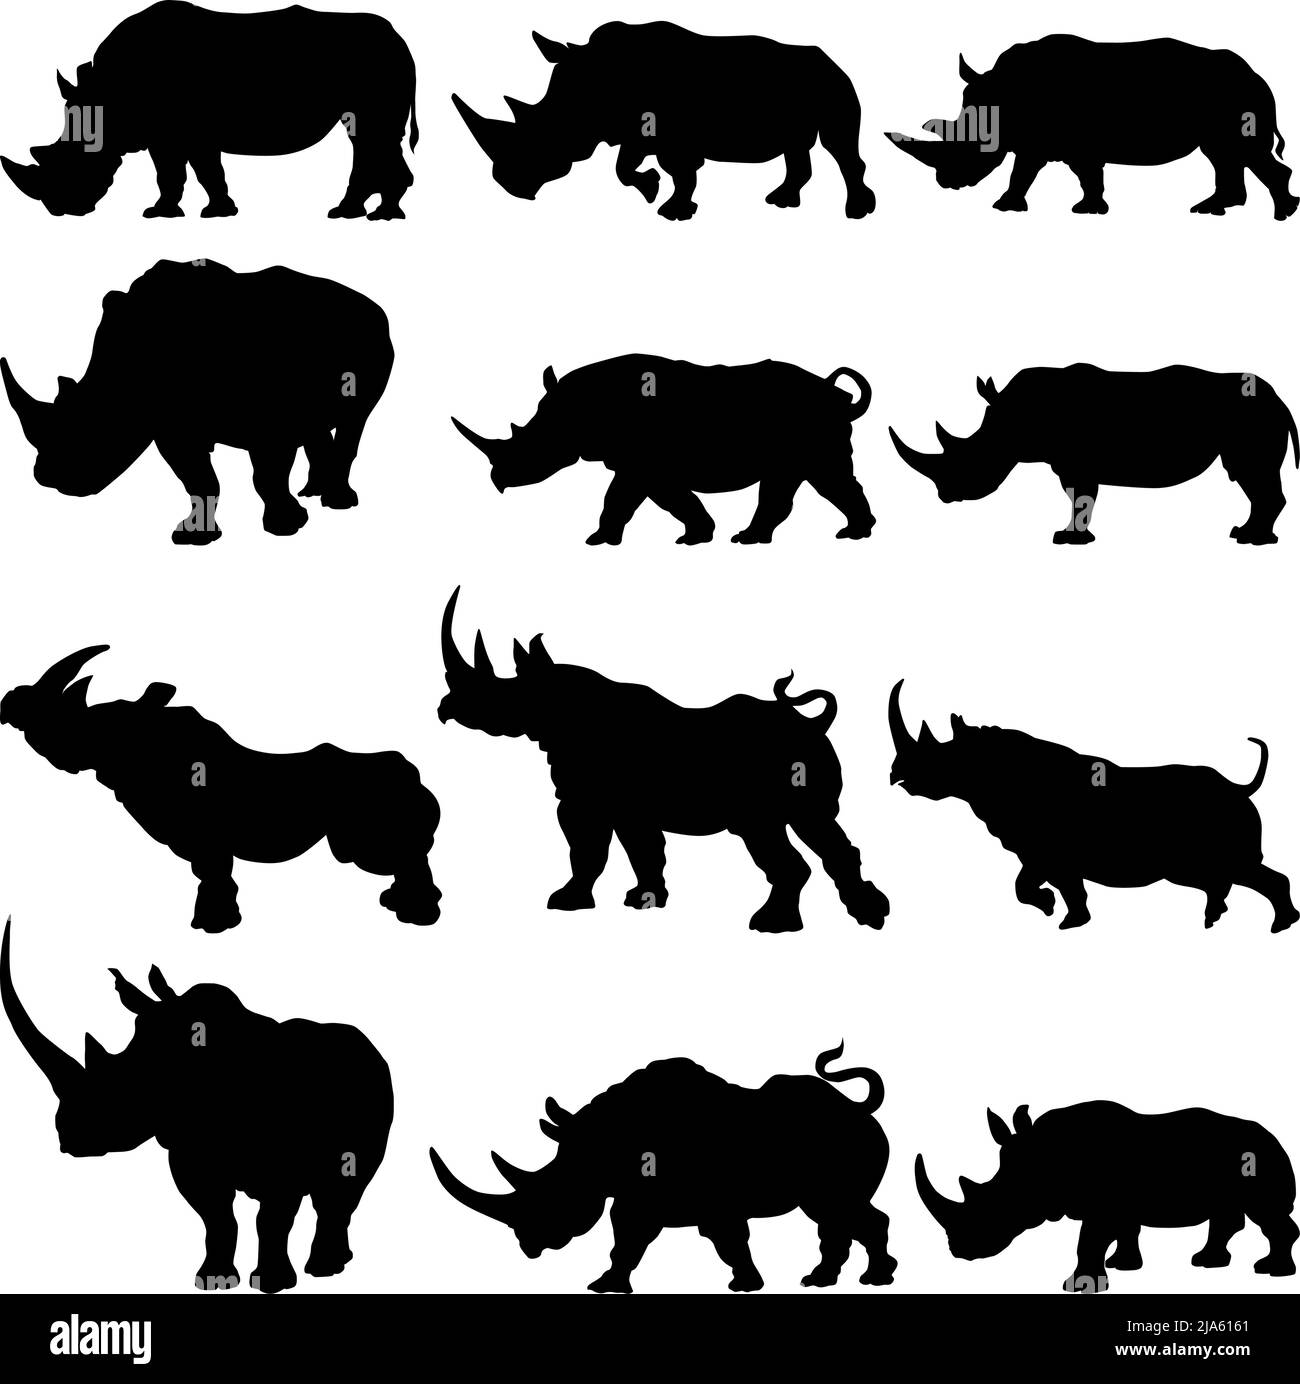 Set Of rhinoceros silhouette in different poses cartoon animal design flat vector illustration isolated on white background Stock Vector